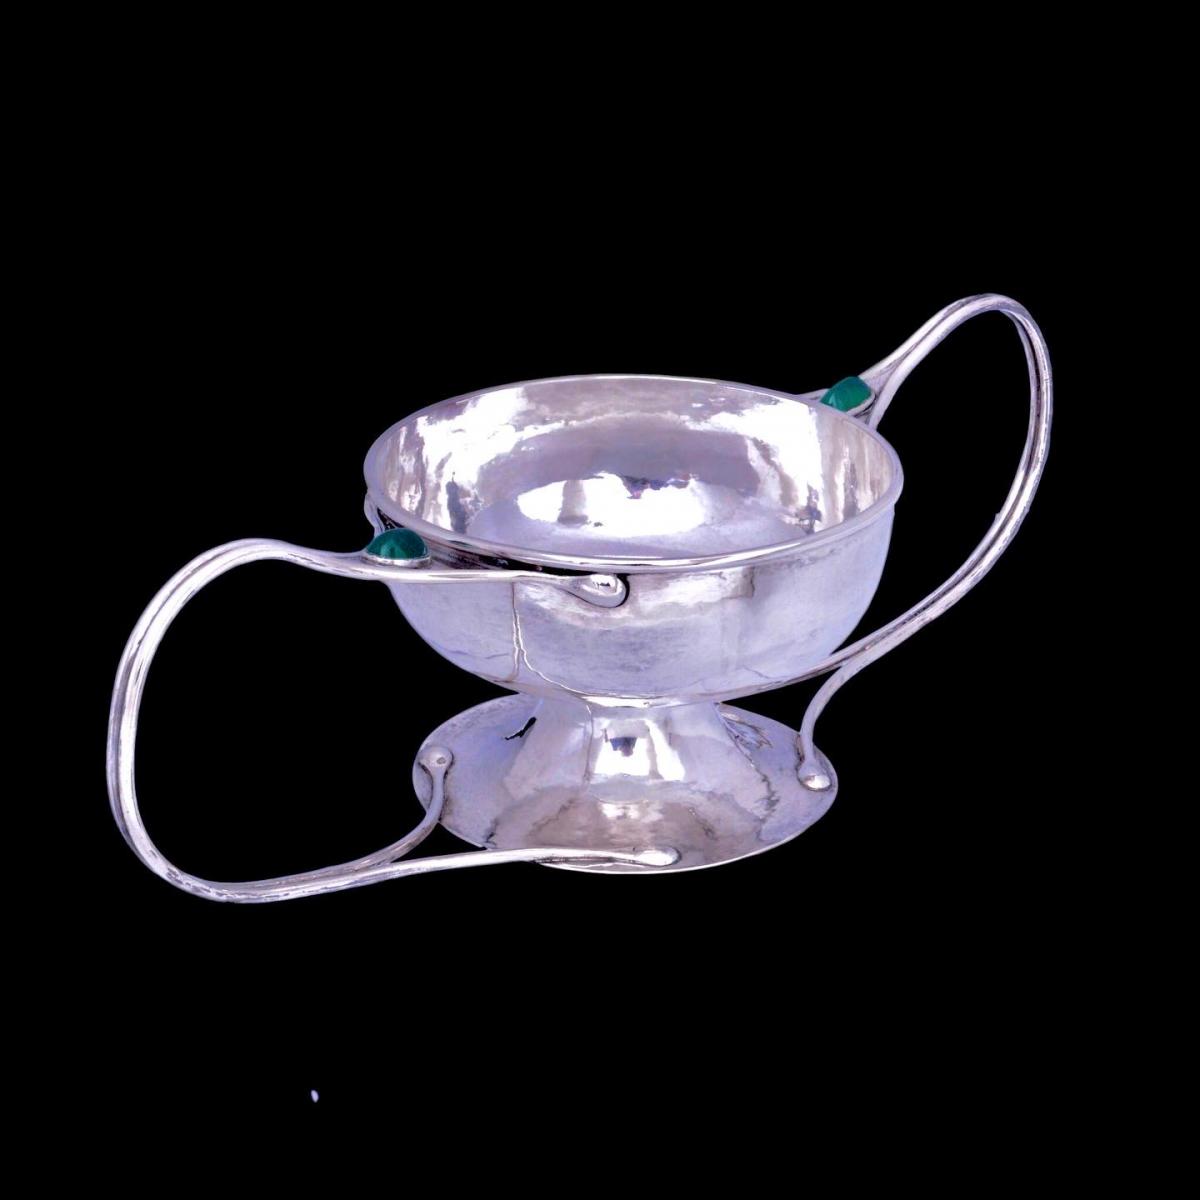 Charles ashbee silver, guild of handicraft silver